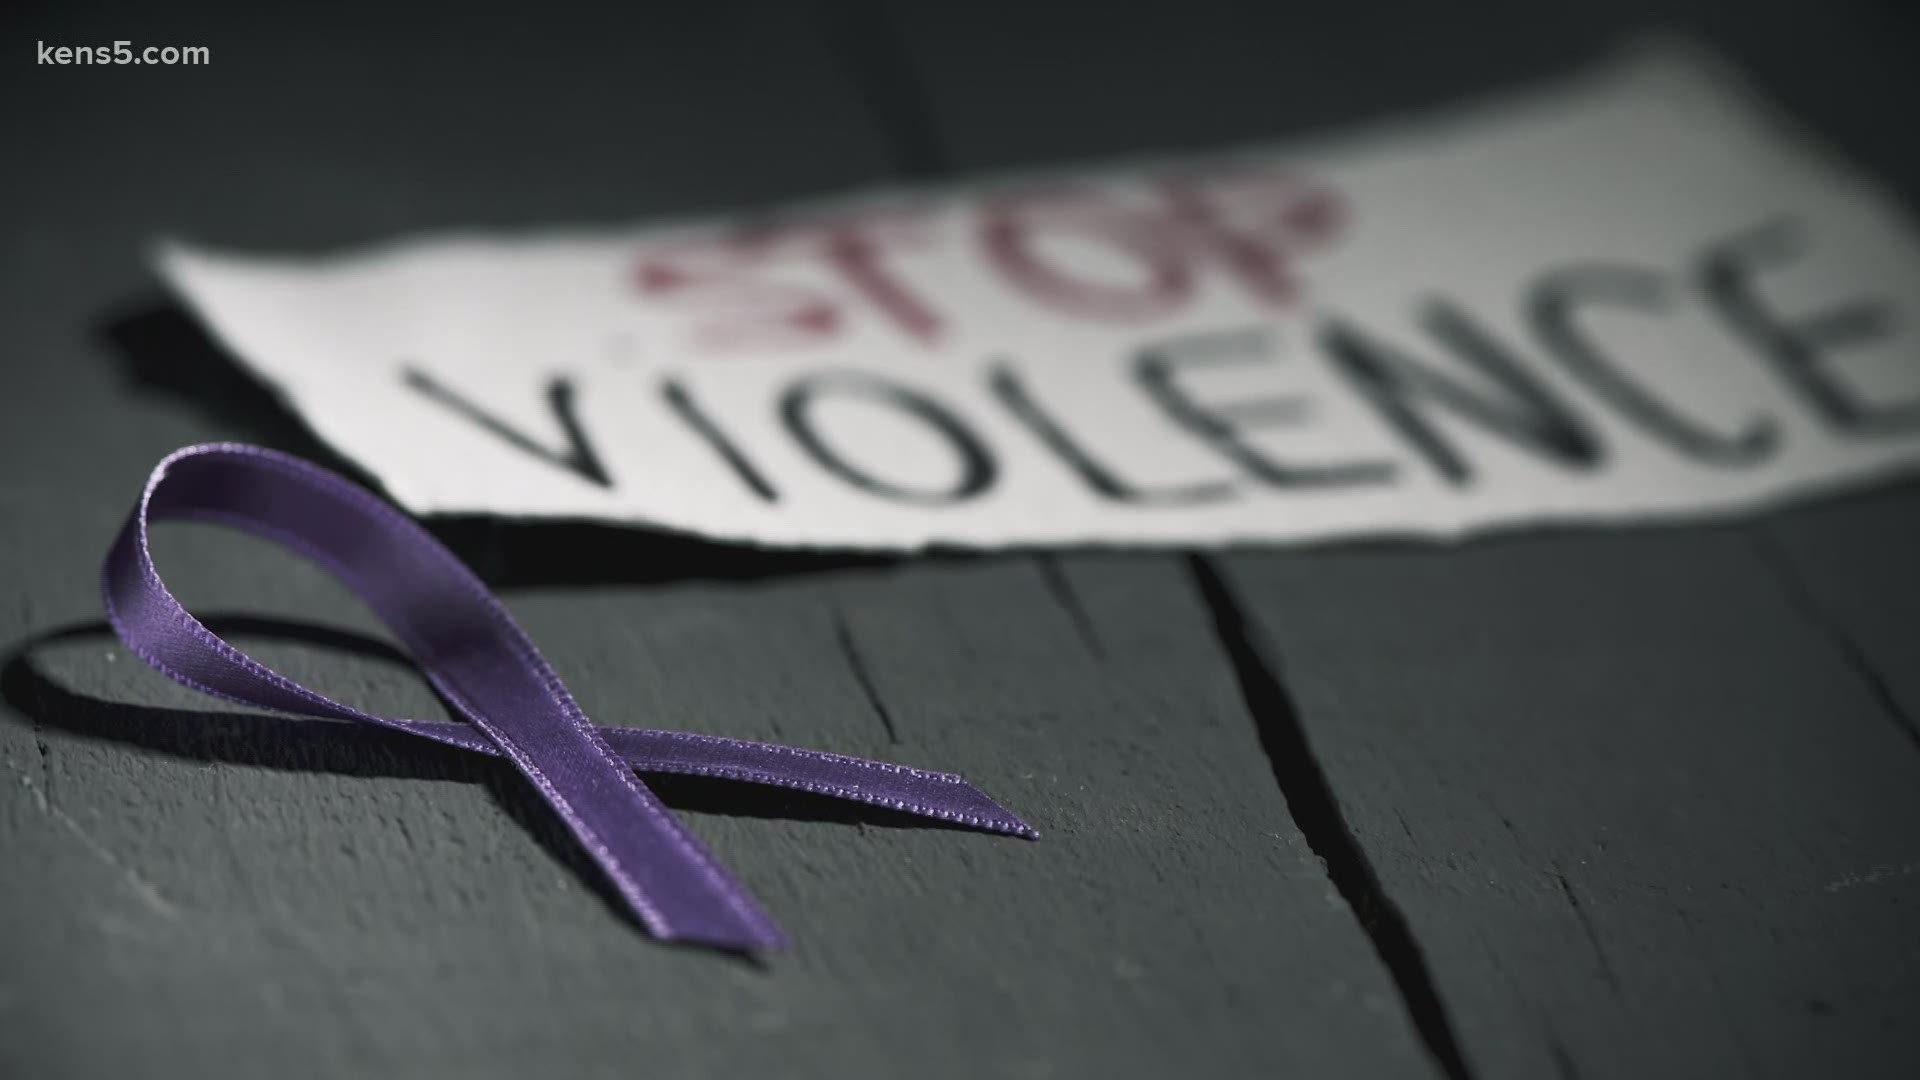 A woman who works with victims of domestic violence in New Braunfels says cases are increasing, and the pandemic does not help.